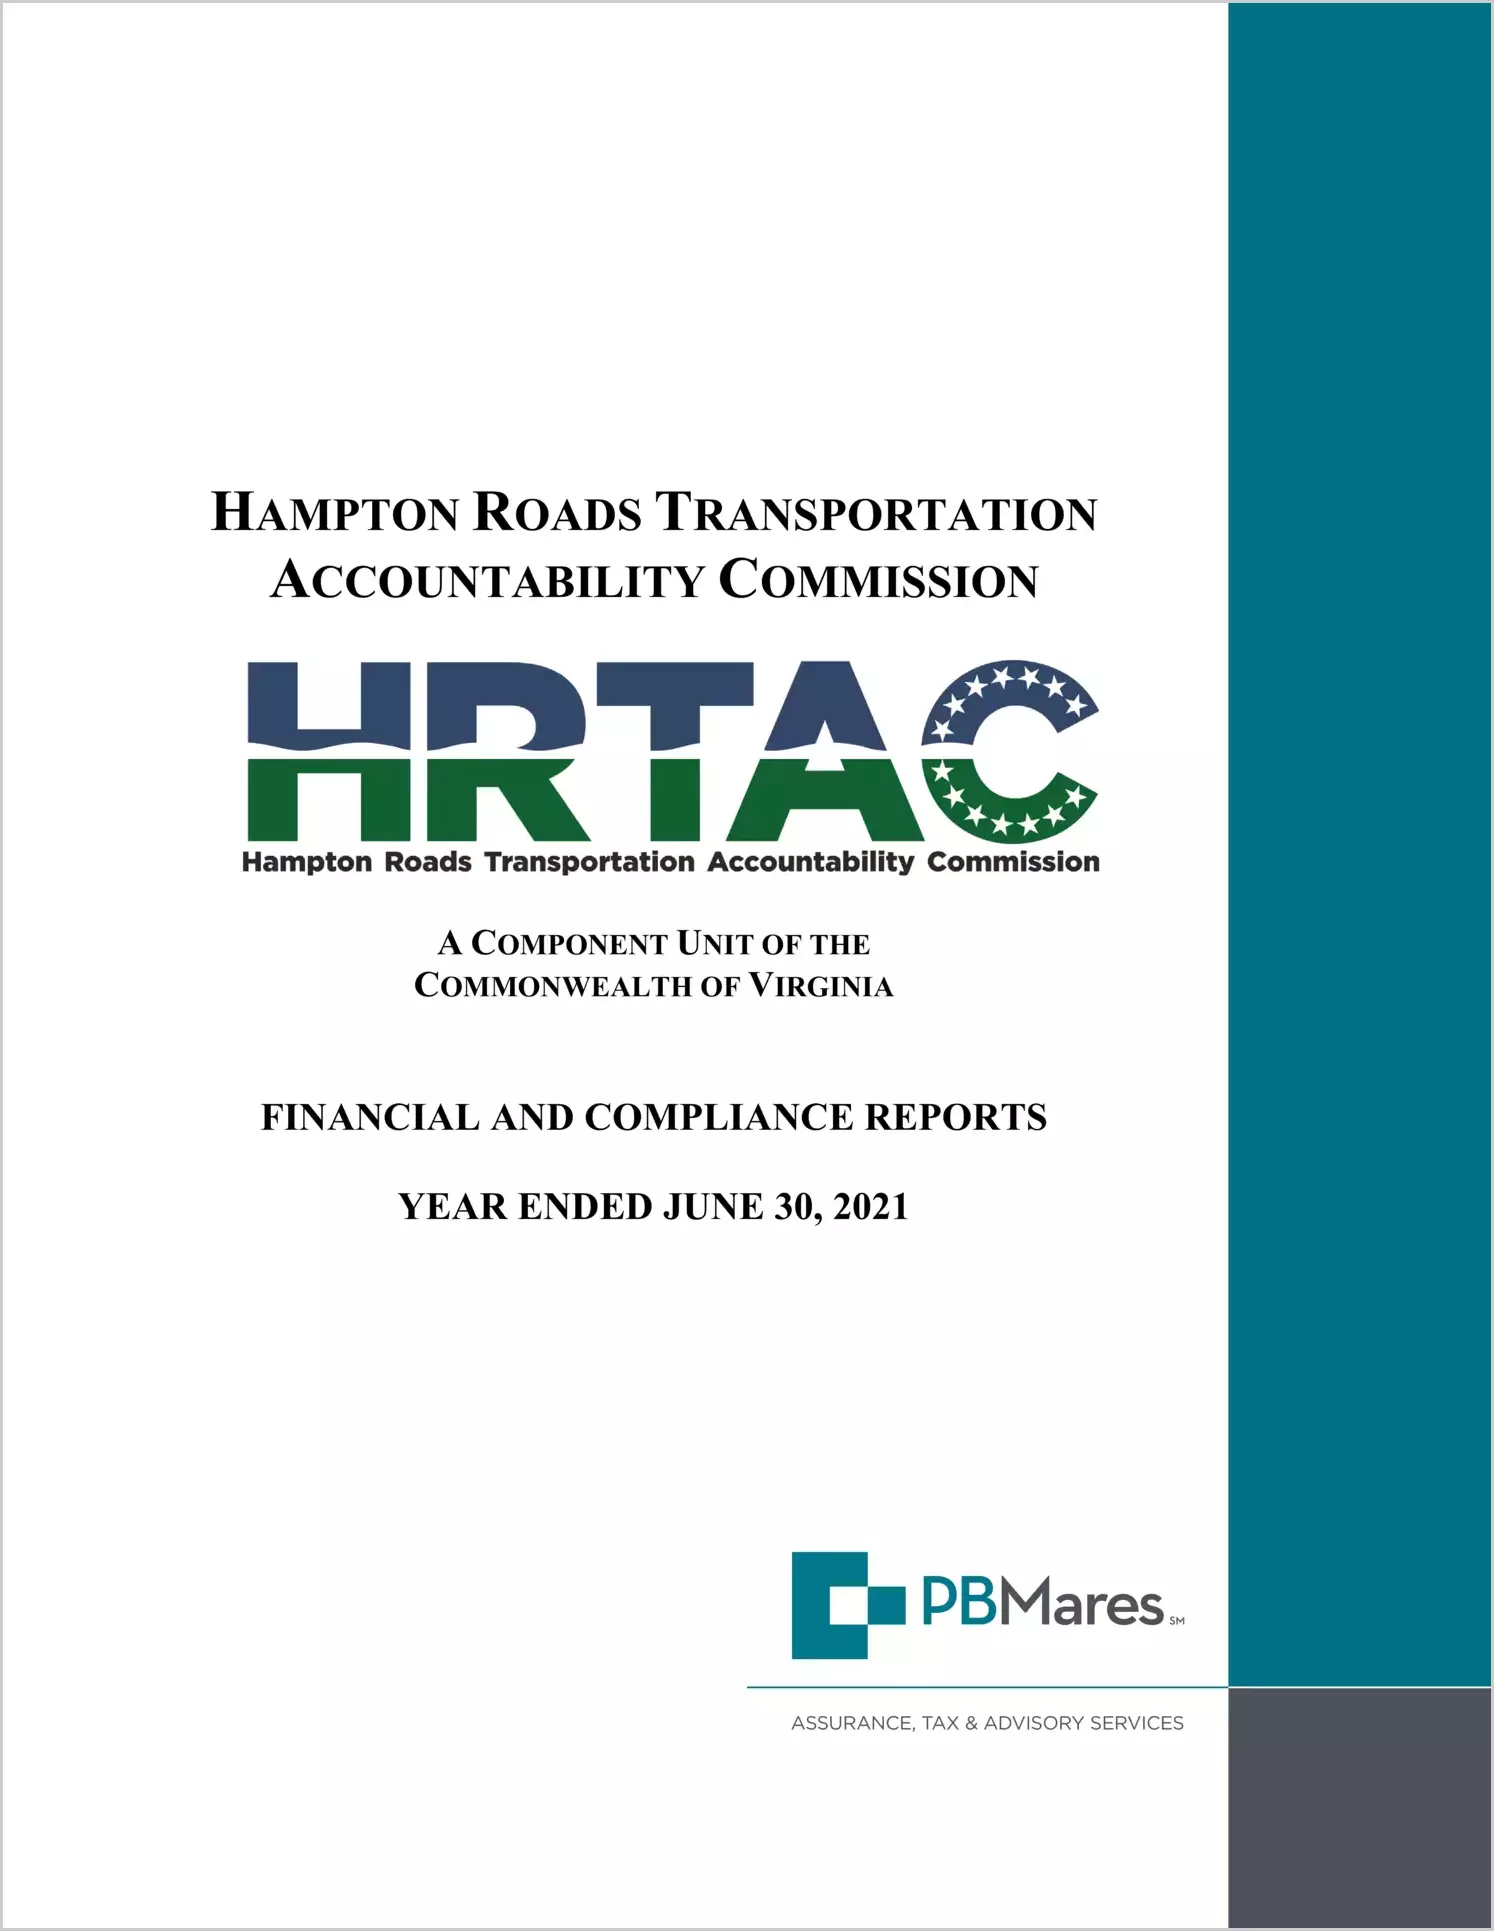 Hampton Roads Transportation Accountability Commission for the year ended June 30, 2021